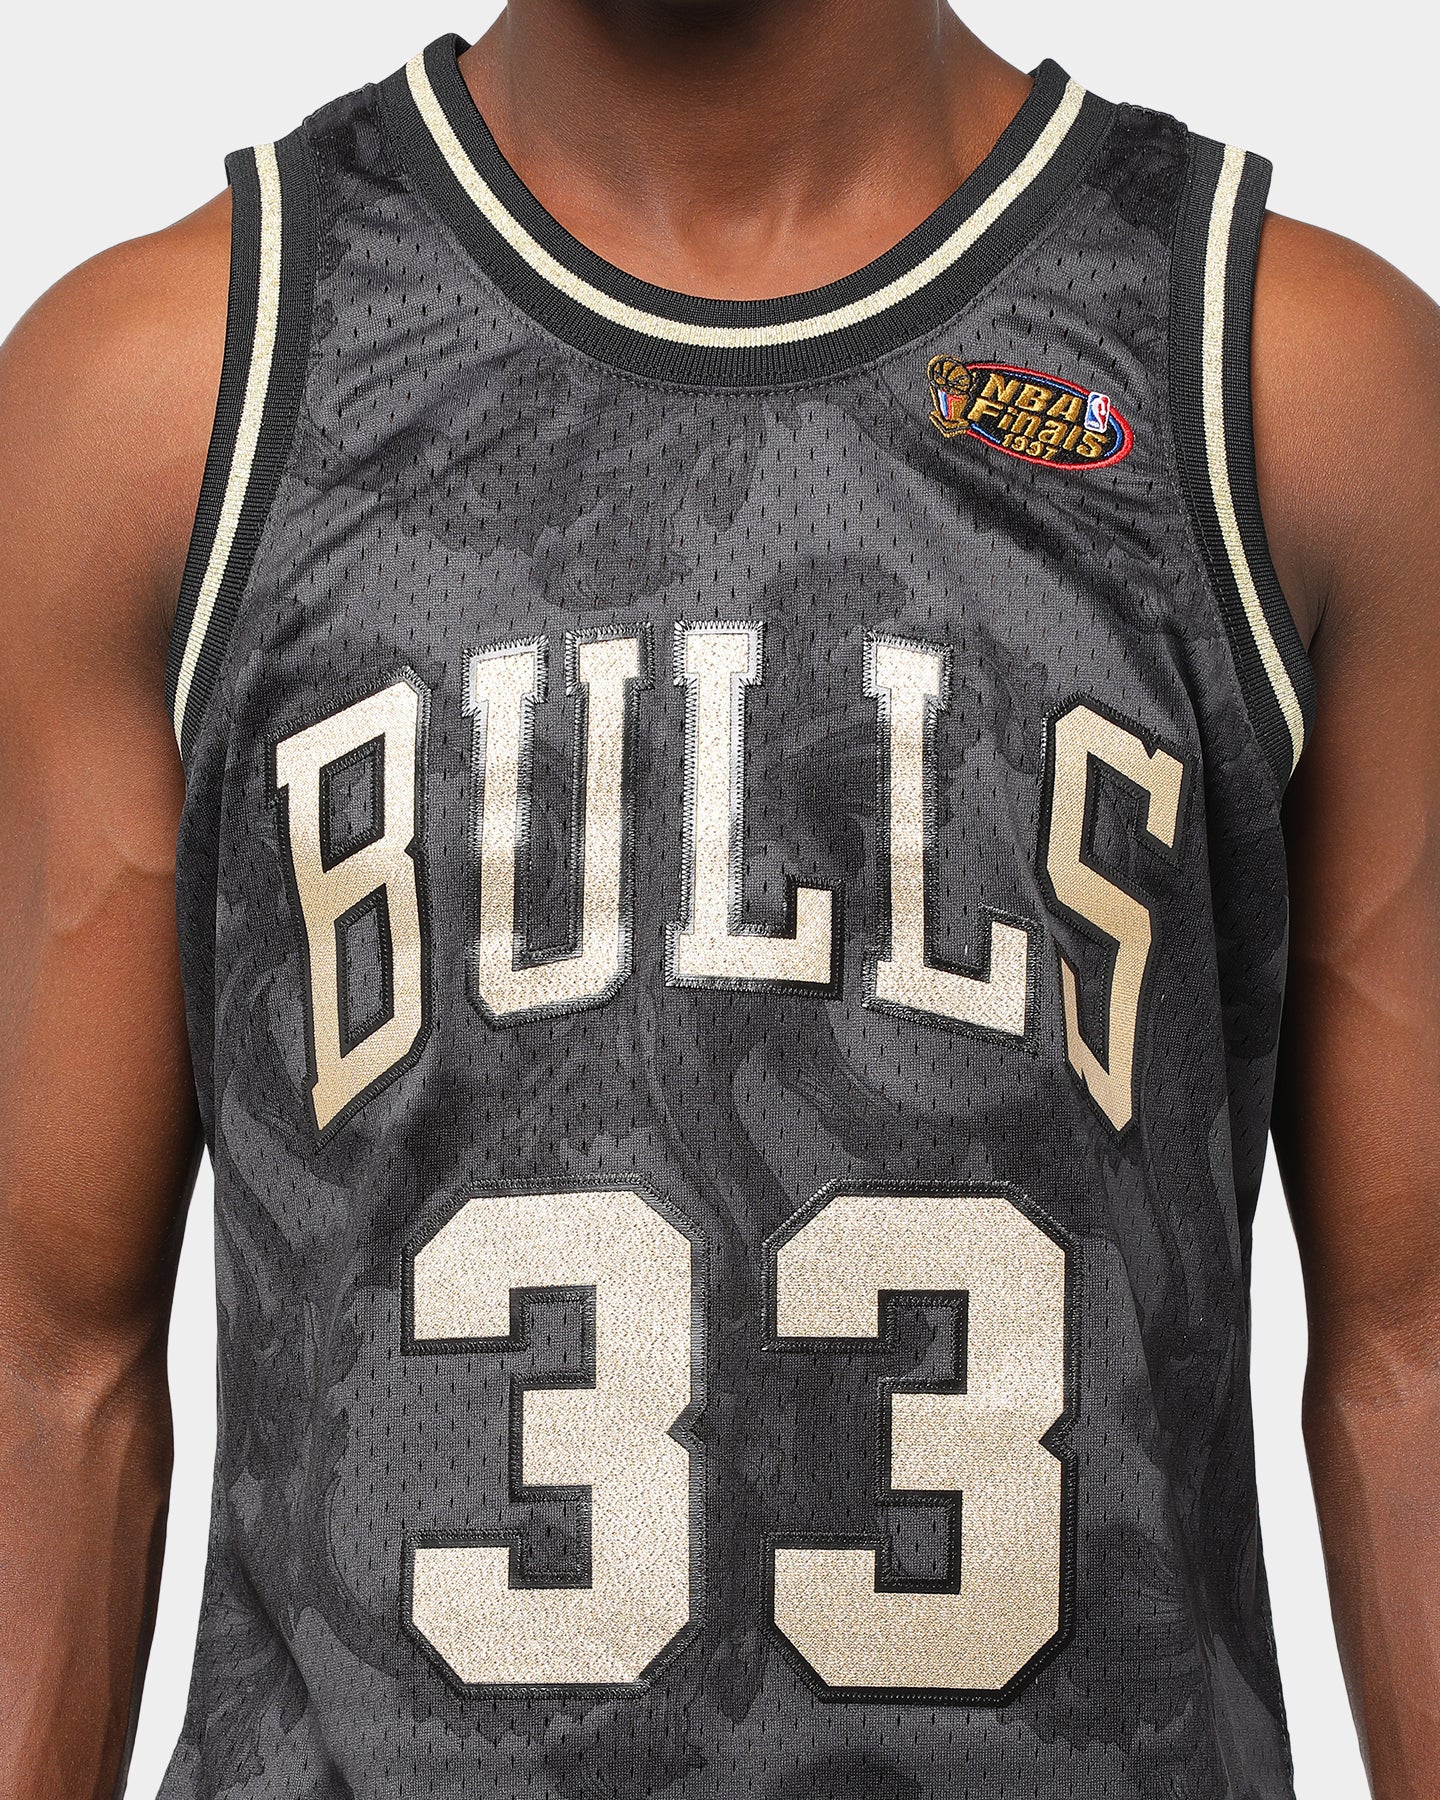 black and gold bulls jersey